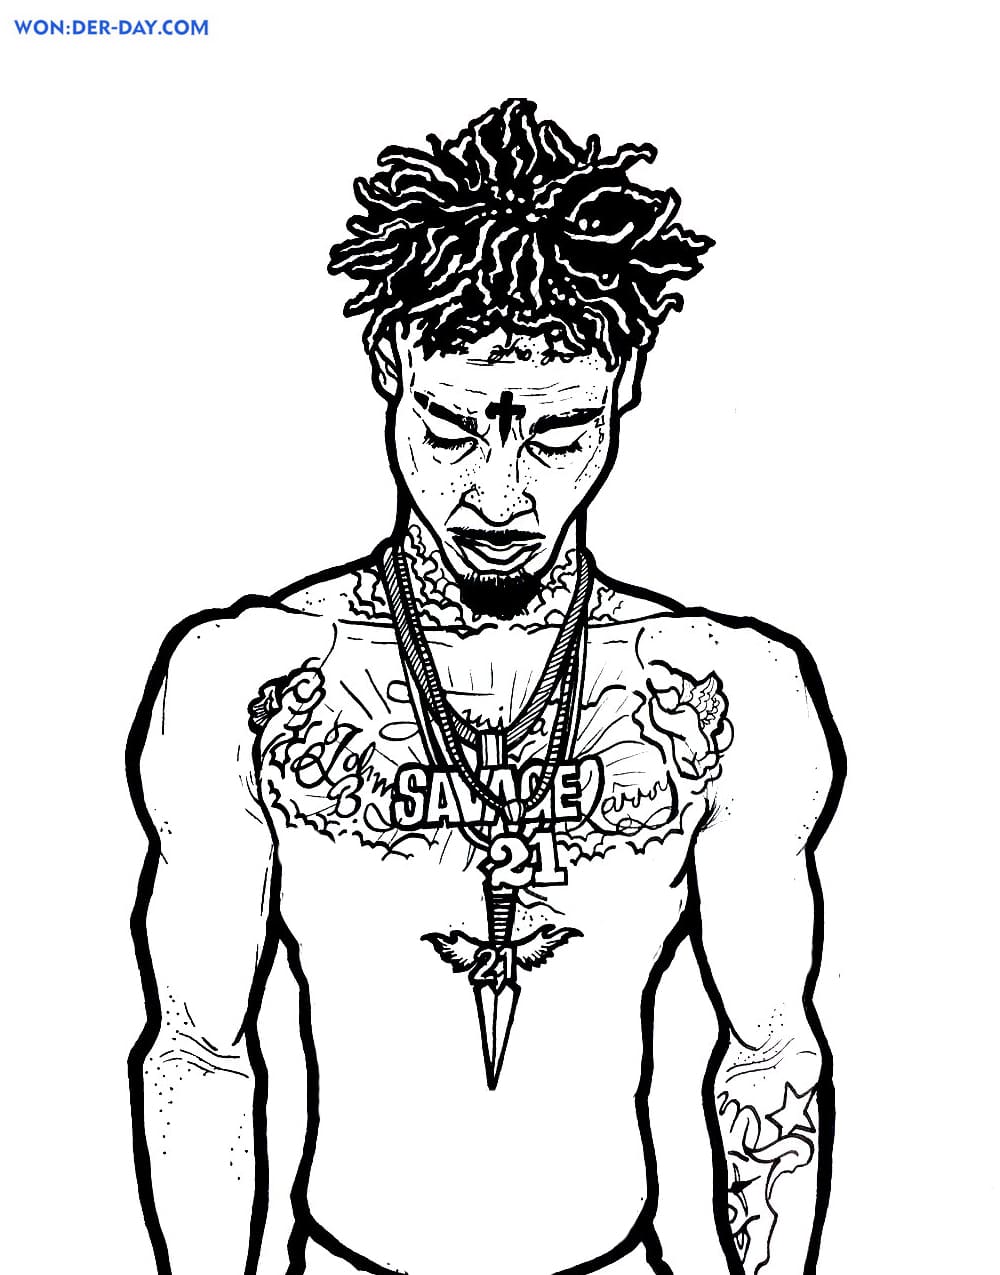 21 Savage coloring pages - Print for Free | WONDER DAY — Coloring pages for  children and adults